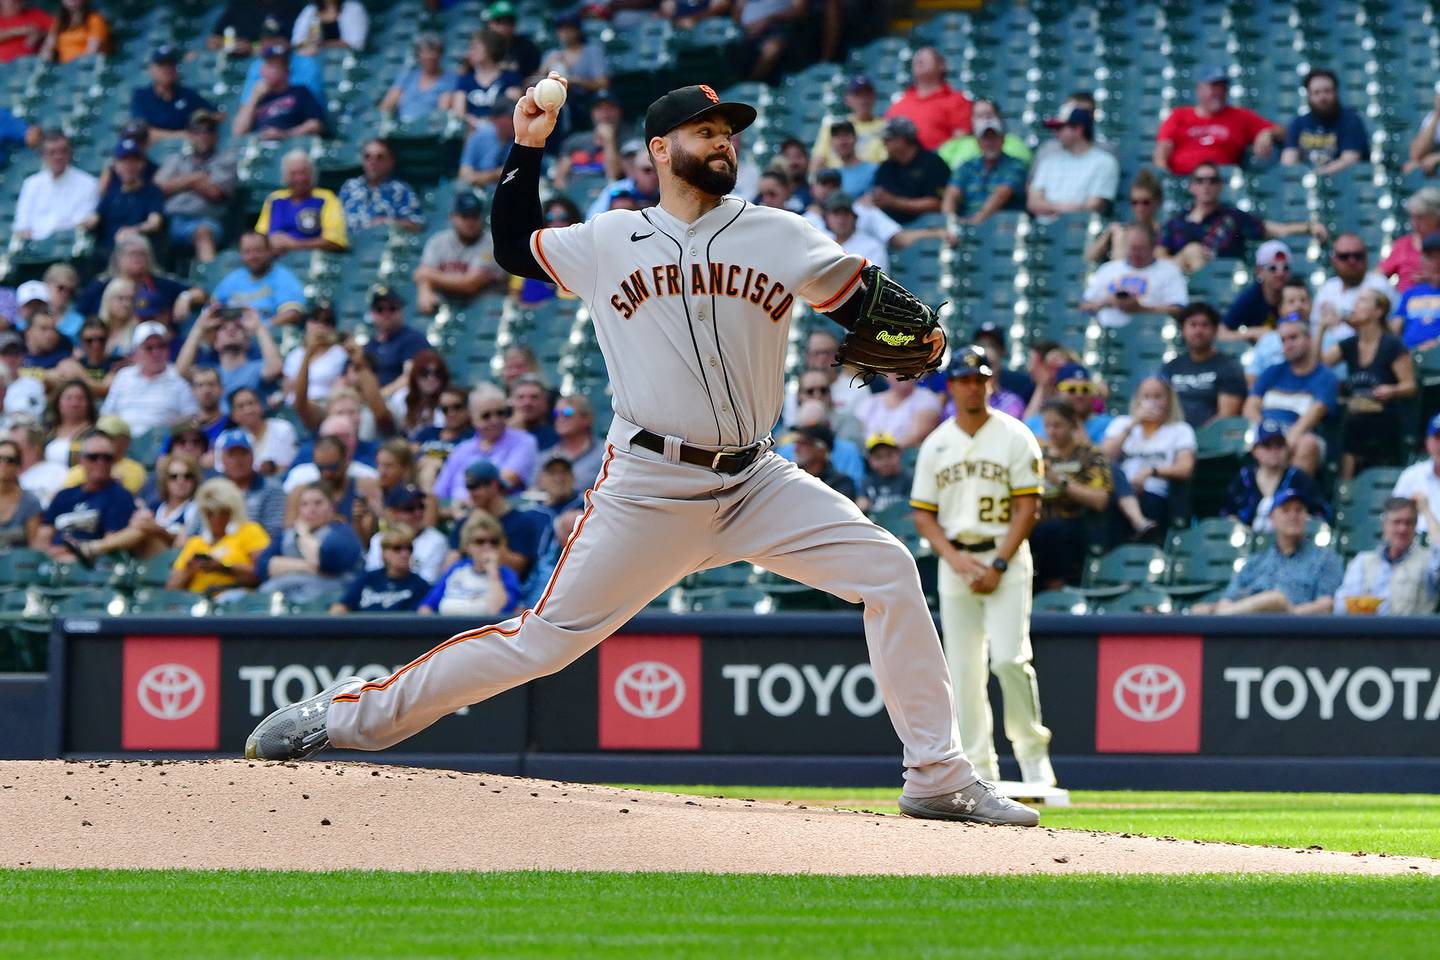 Giants starter Jakob Junis pitches against the Brewers on Thursday, Sept. 8, 2022. The Rock Falls native has had a solid season in his first year with San Francisco.